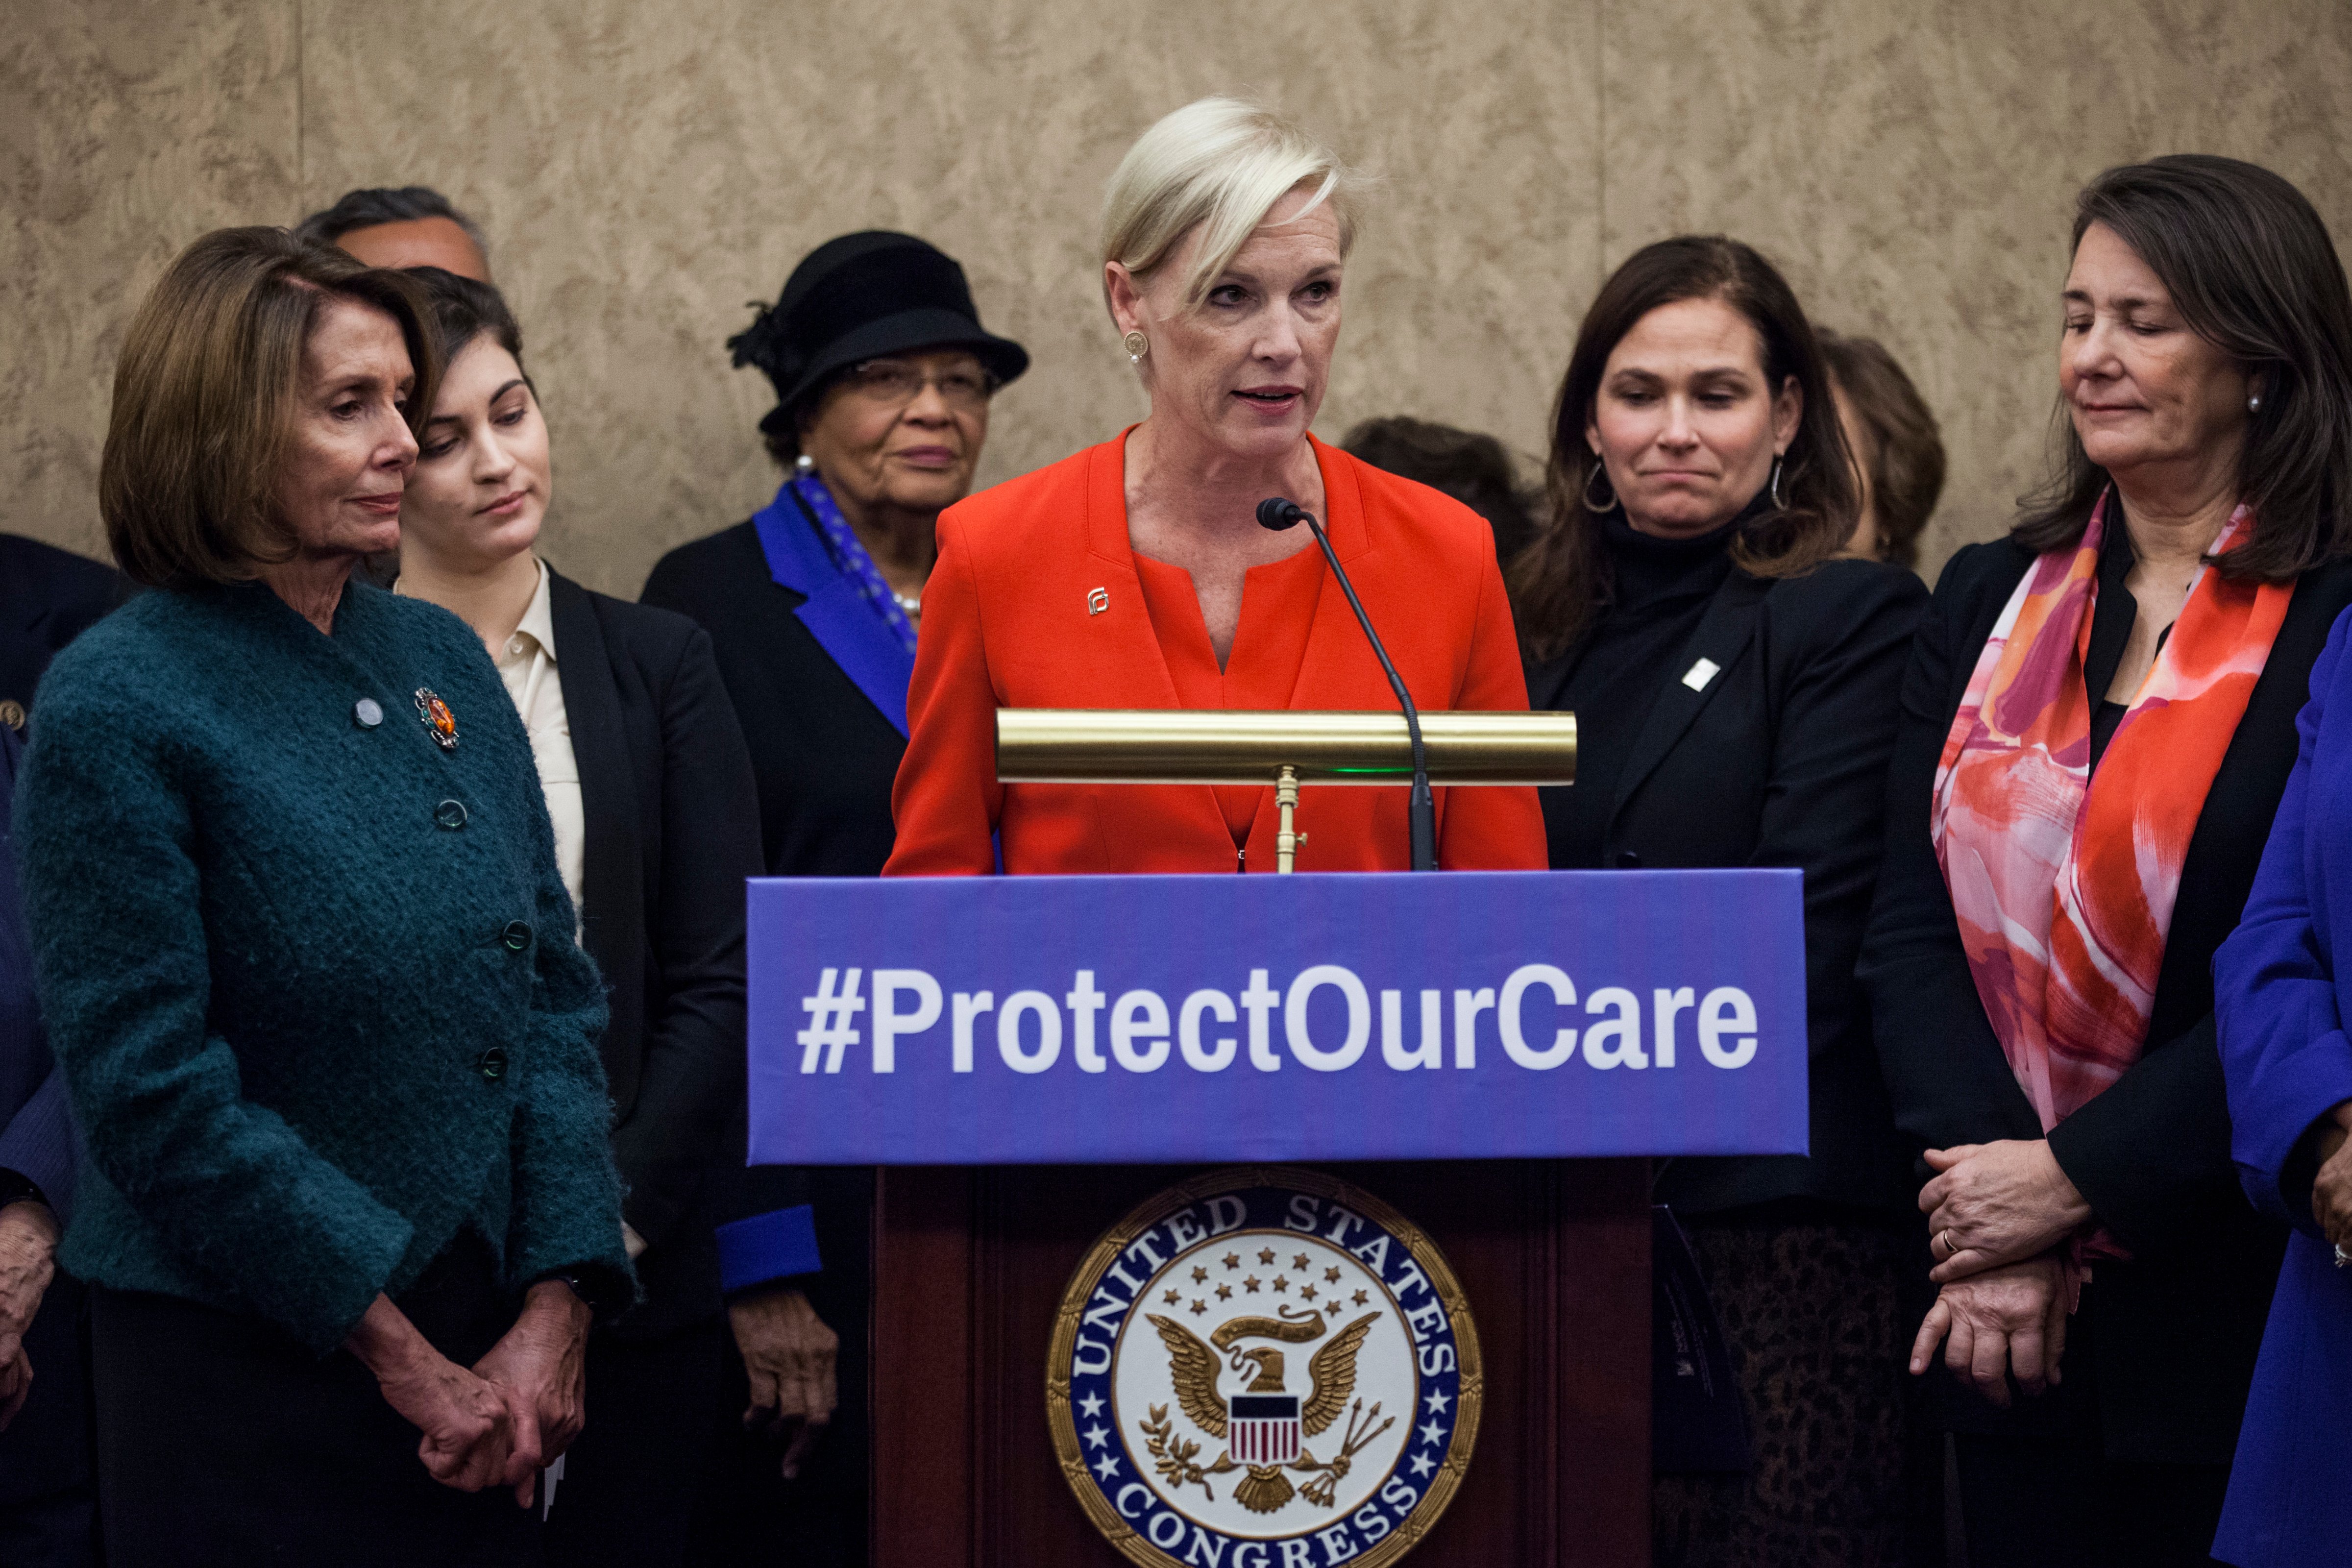 Planned Parenthood president Cecile Richards, joined by House Minority Leader Nancy Pelosi of Calif., left, and Rep. Diana DeGette, D-Colo., right, and others, speaks during a news conference discussing women's health care, Jan. 5, 2017, on Capitol Hill in Washington.